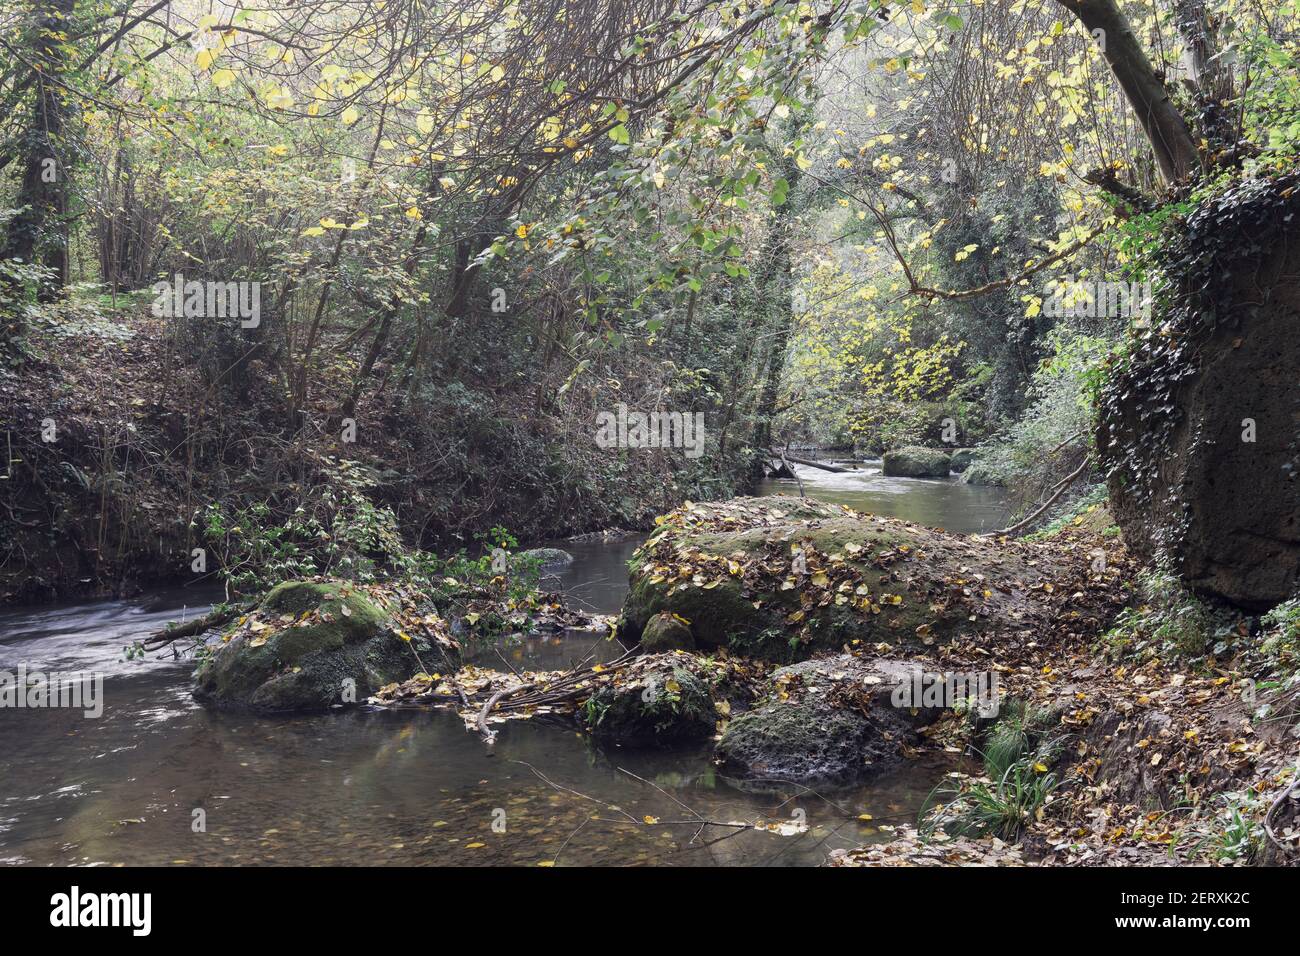 A stretch of river in the middle of vegetation illuminated by a diffused light Stock Photo